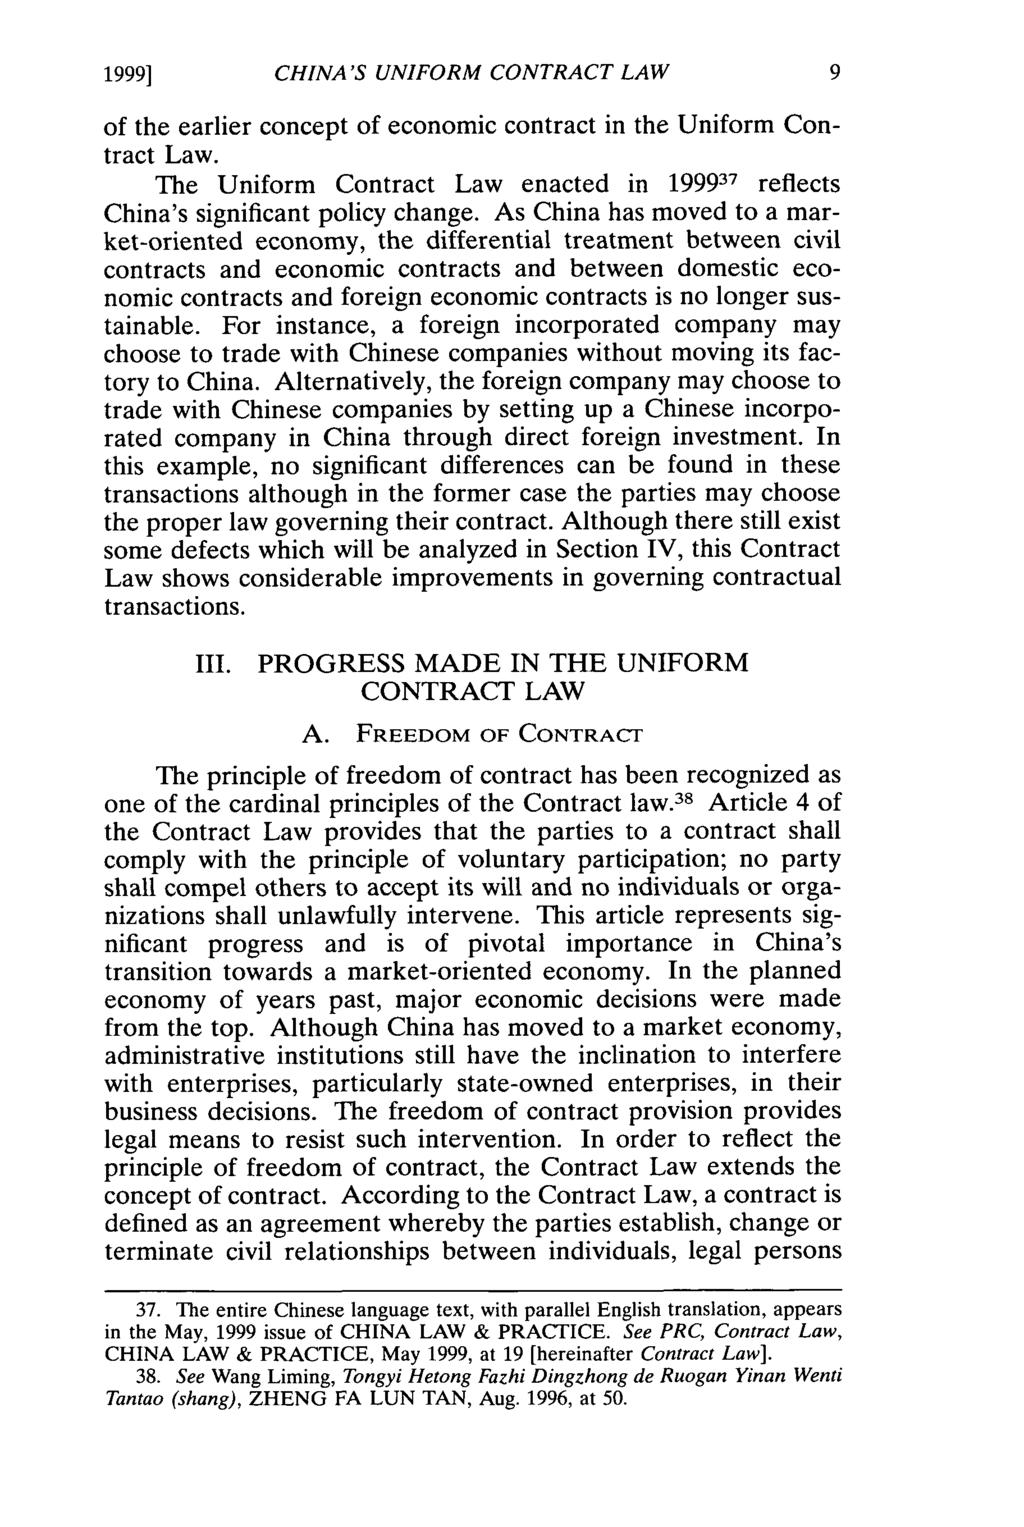 1999] CHINA'S UNIFORM CONTRACT LAW of the earlier concept of economic contract in the Uniform Contract Law. The Uniform Contract Law enacted in 199937 reflects China's significant policy change.